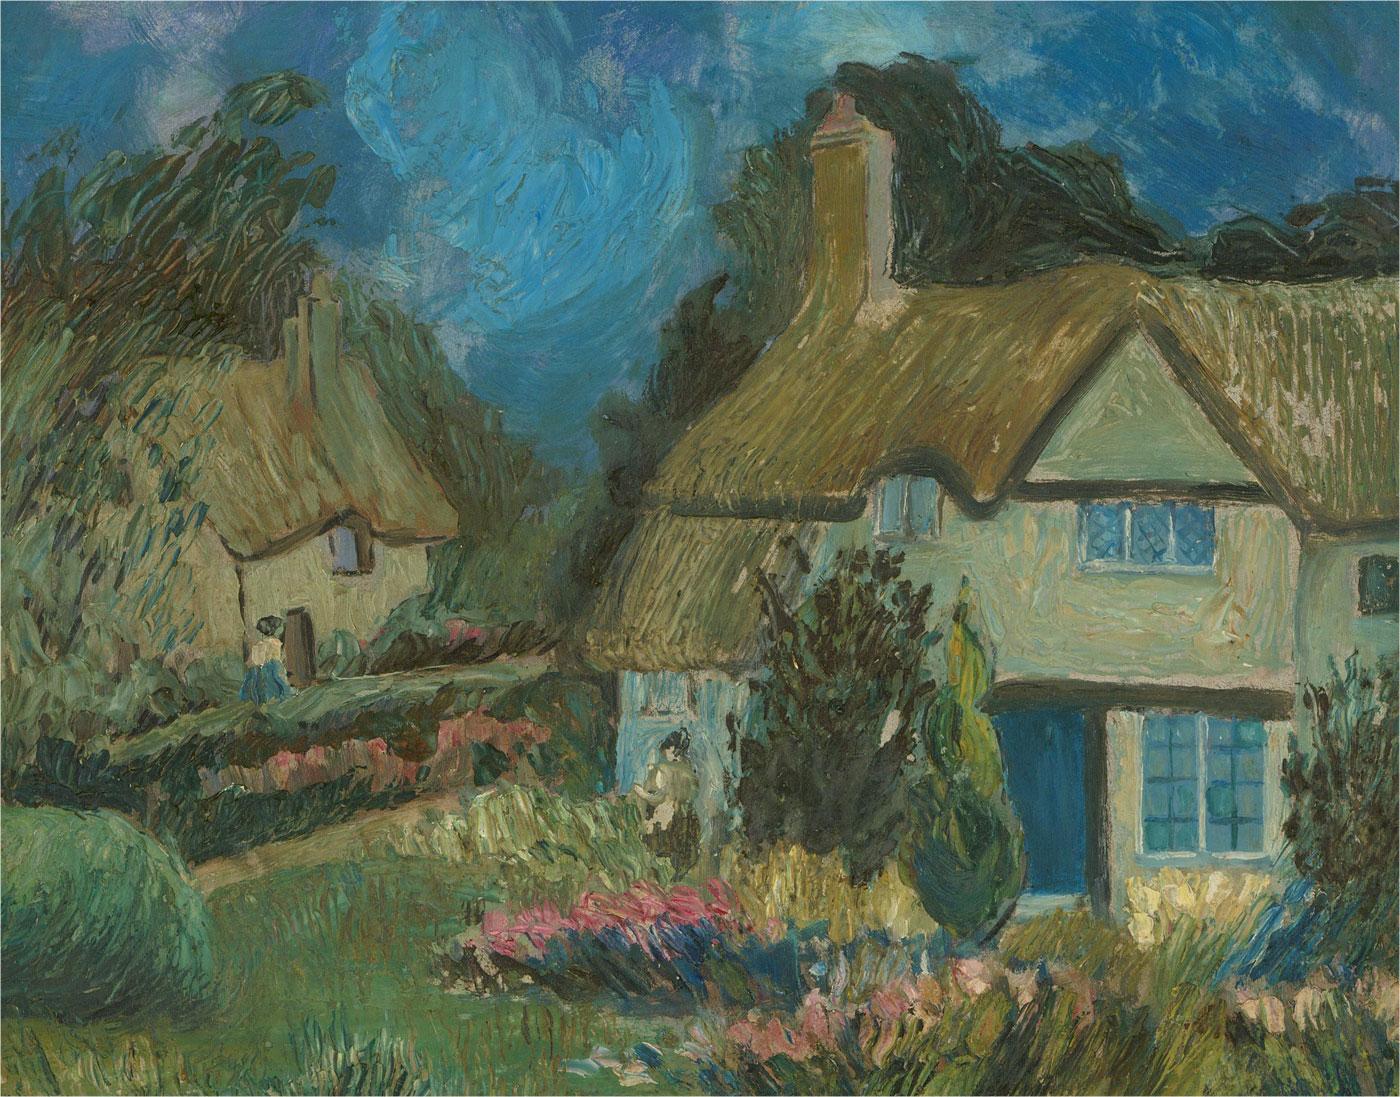 Mid 20th Century Oil - Blue Skies and Thatched Cottages - Painting by Unknown